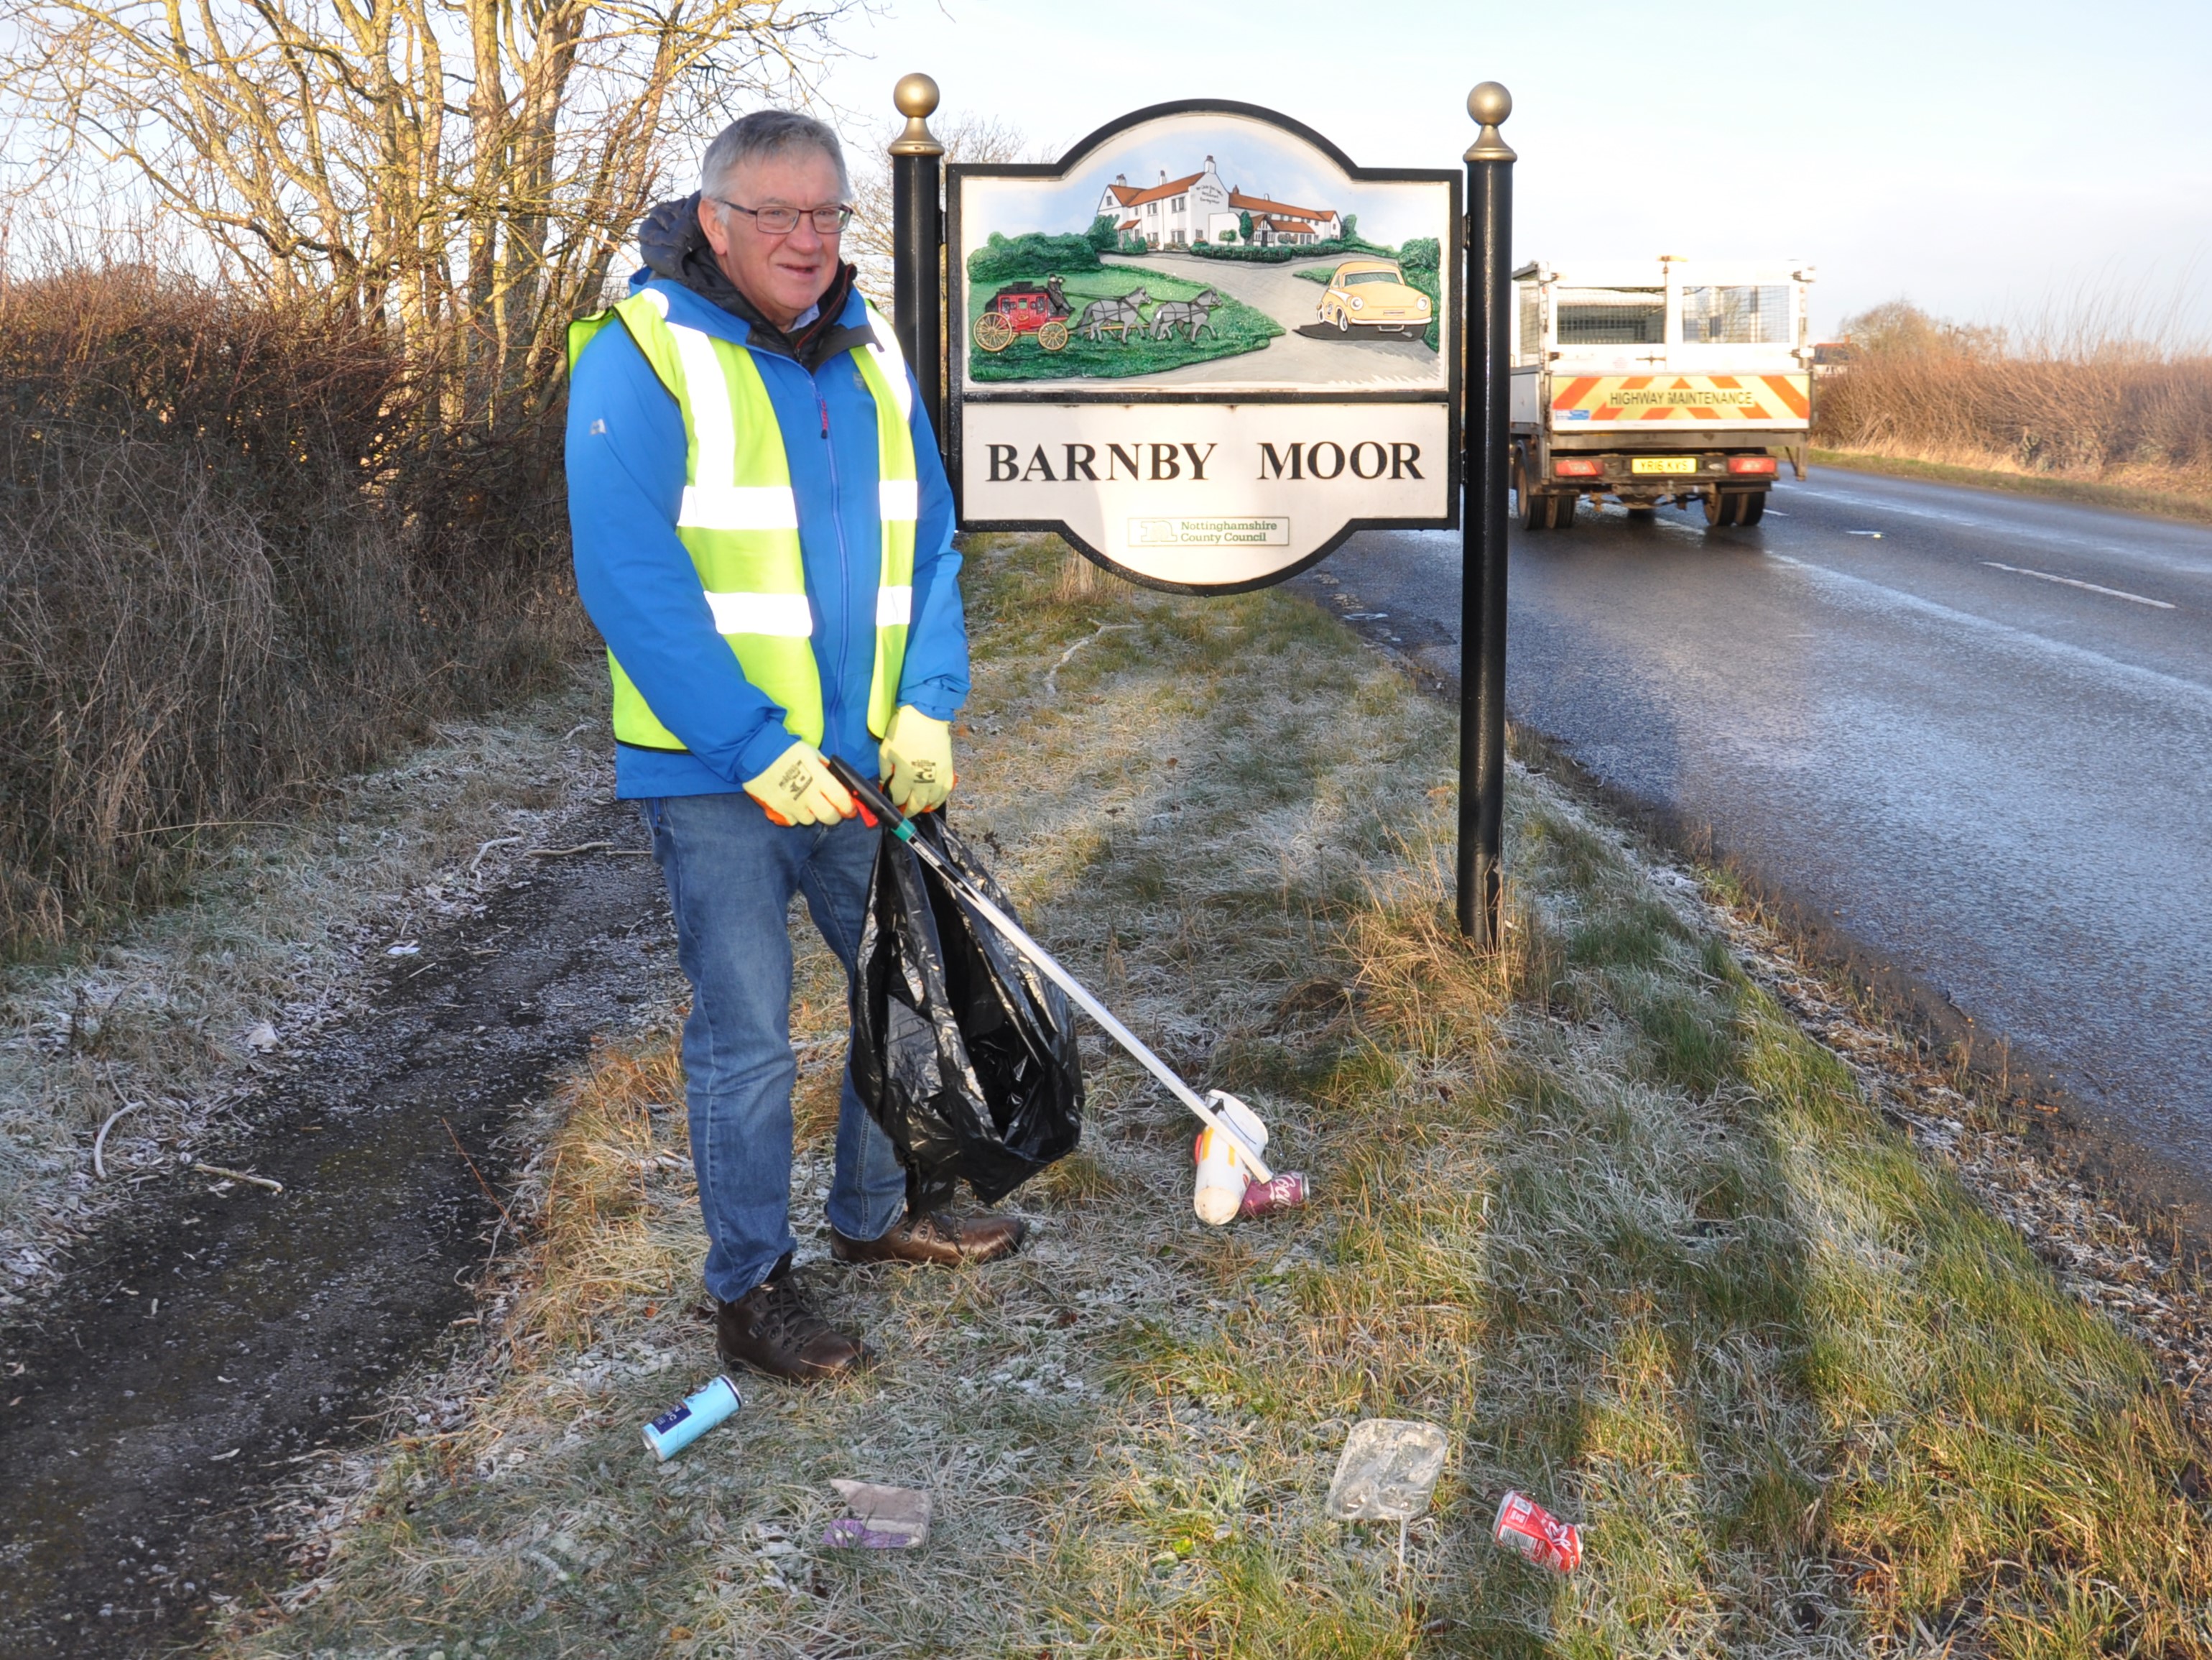 Spring Clean is Back in Bassetlaw